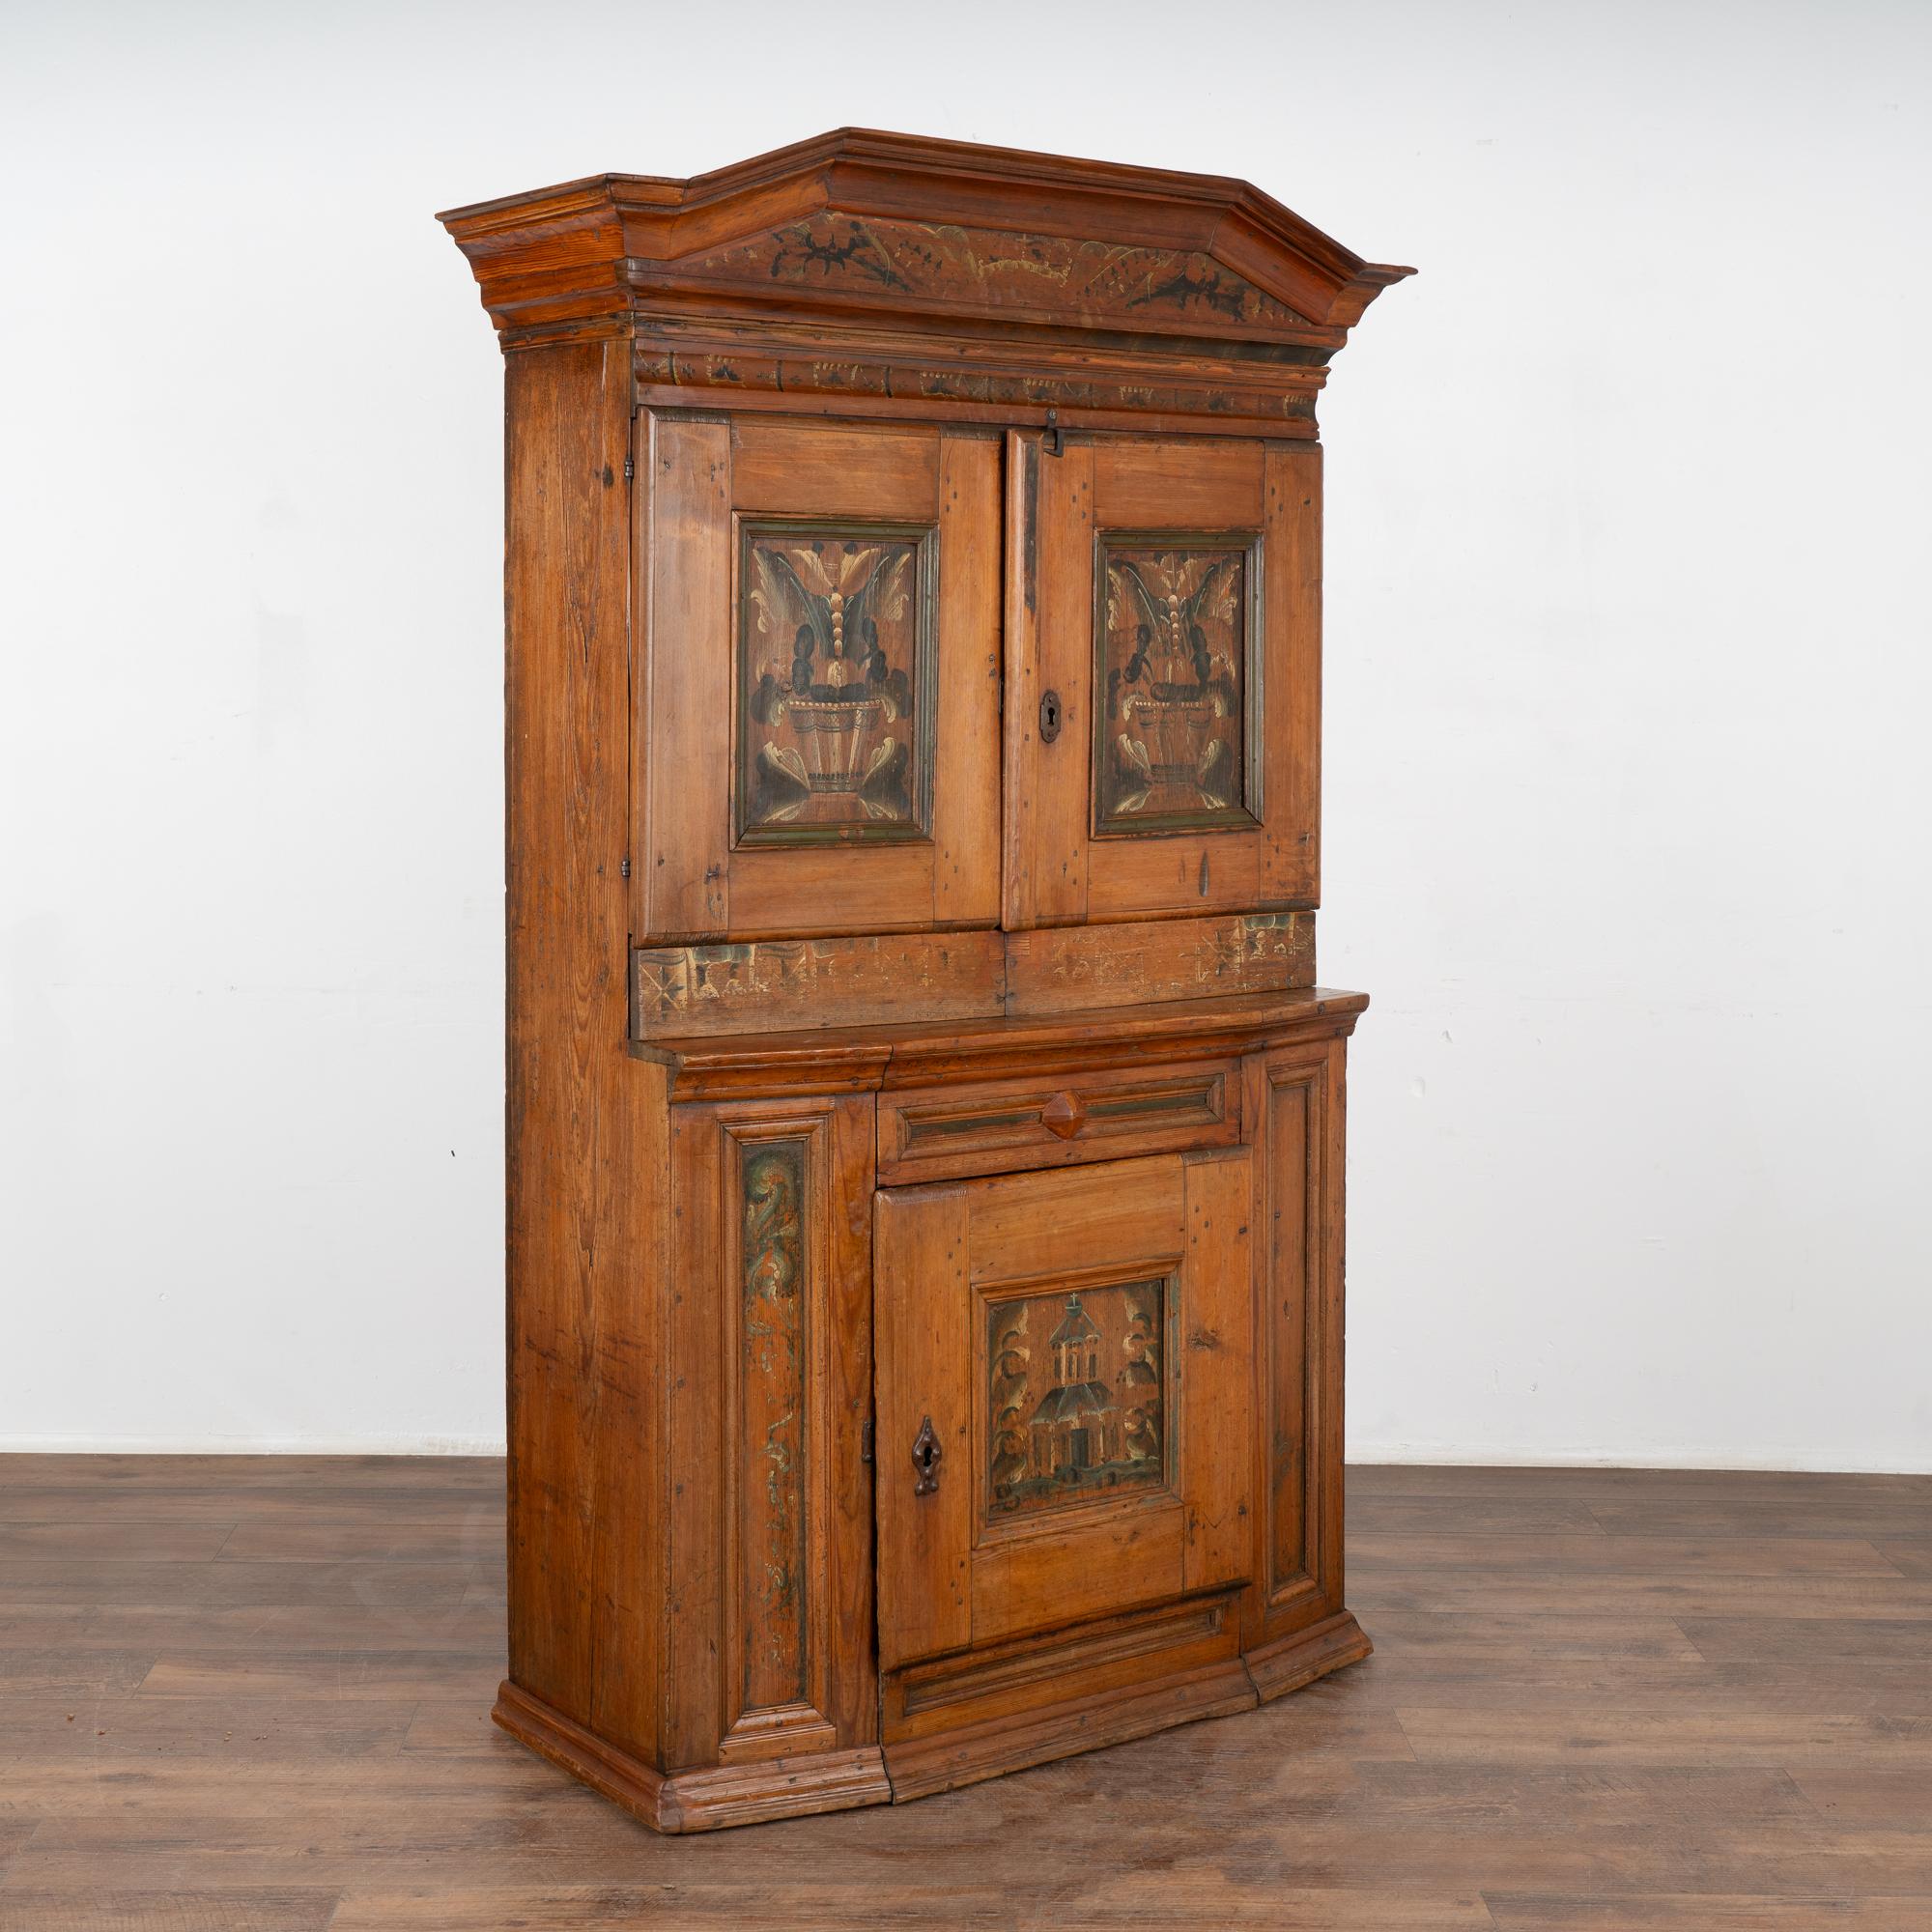 This pine cabinet is a remarkable example of Swedish country craftsmanship and original folk art painting. The deep patina of the pine is a result of many generations of use and age.
The door panels and crown are embellished with hand painted